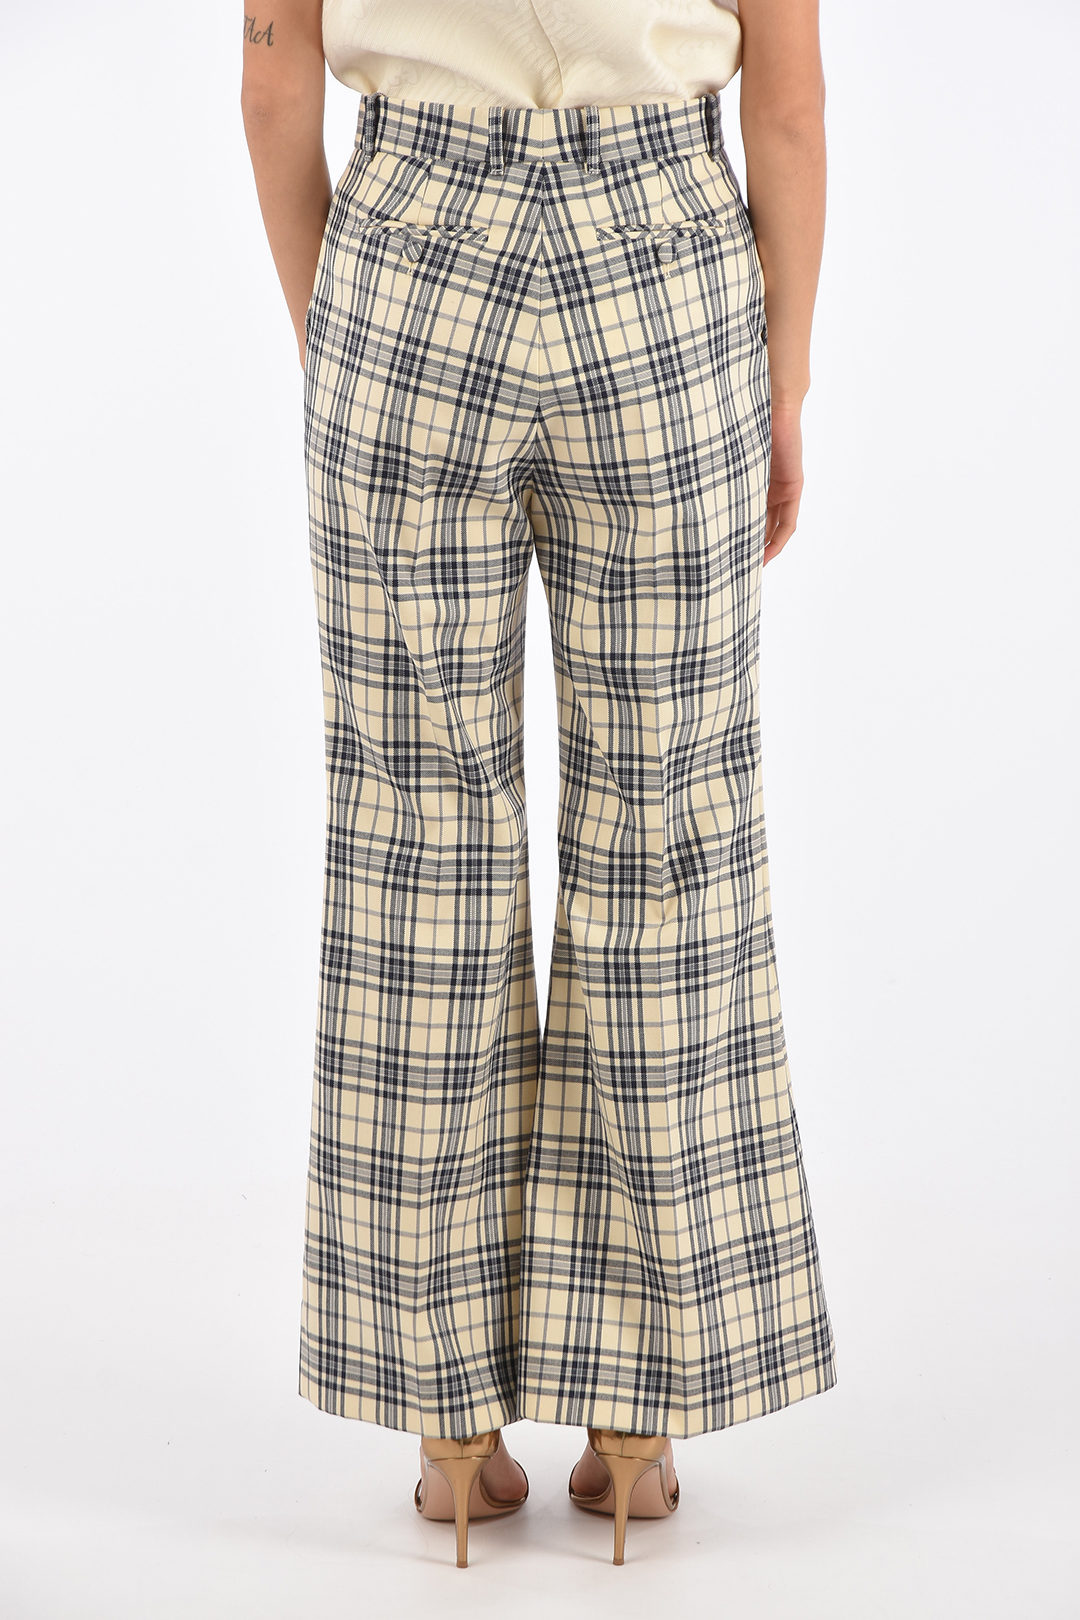 Gucci checked trousers 570  liked on Polyvore featuring mens fashion  mens clothing mens pants  Mens brown dress pants Brown pants men  Mens pants casual